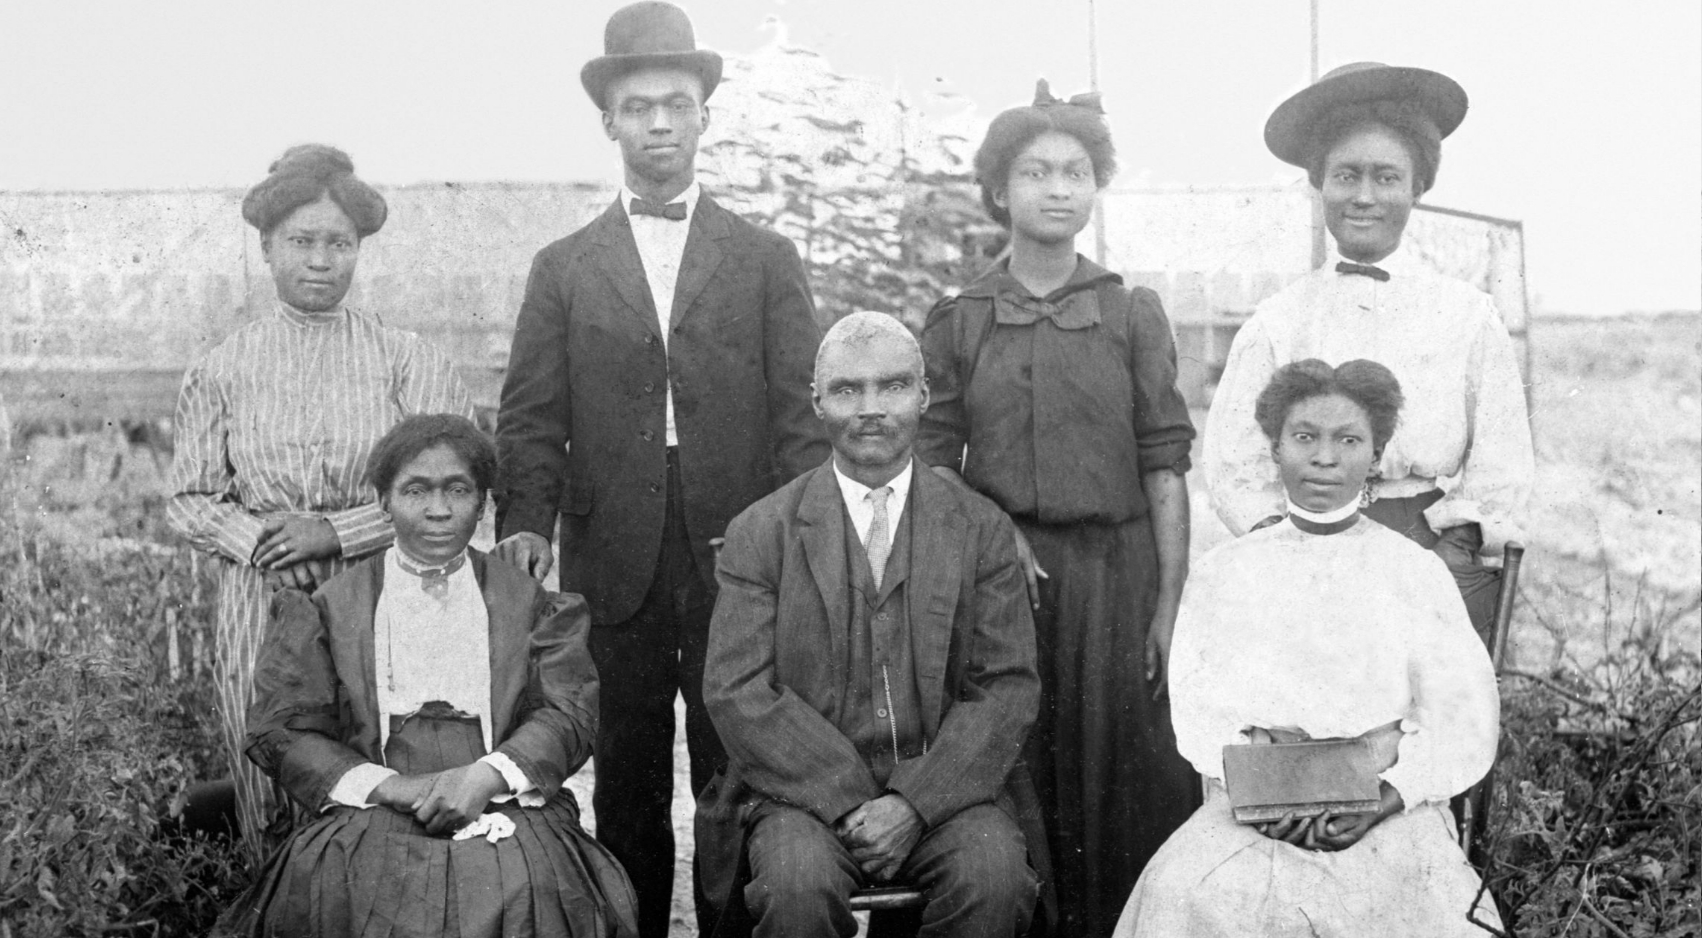 Henrietta Goodwin (first row, far right) photographed with her family. Goodwin was the first African-American student to graduate from SDSU in 1913. (Photo courtesy San Diego History Center)